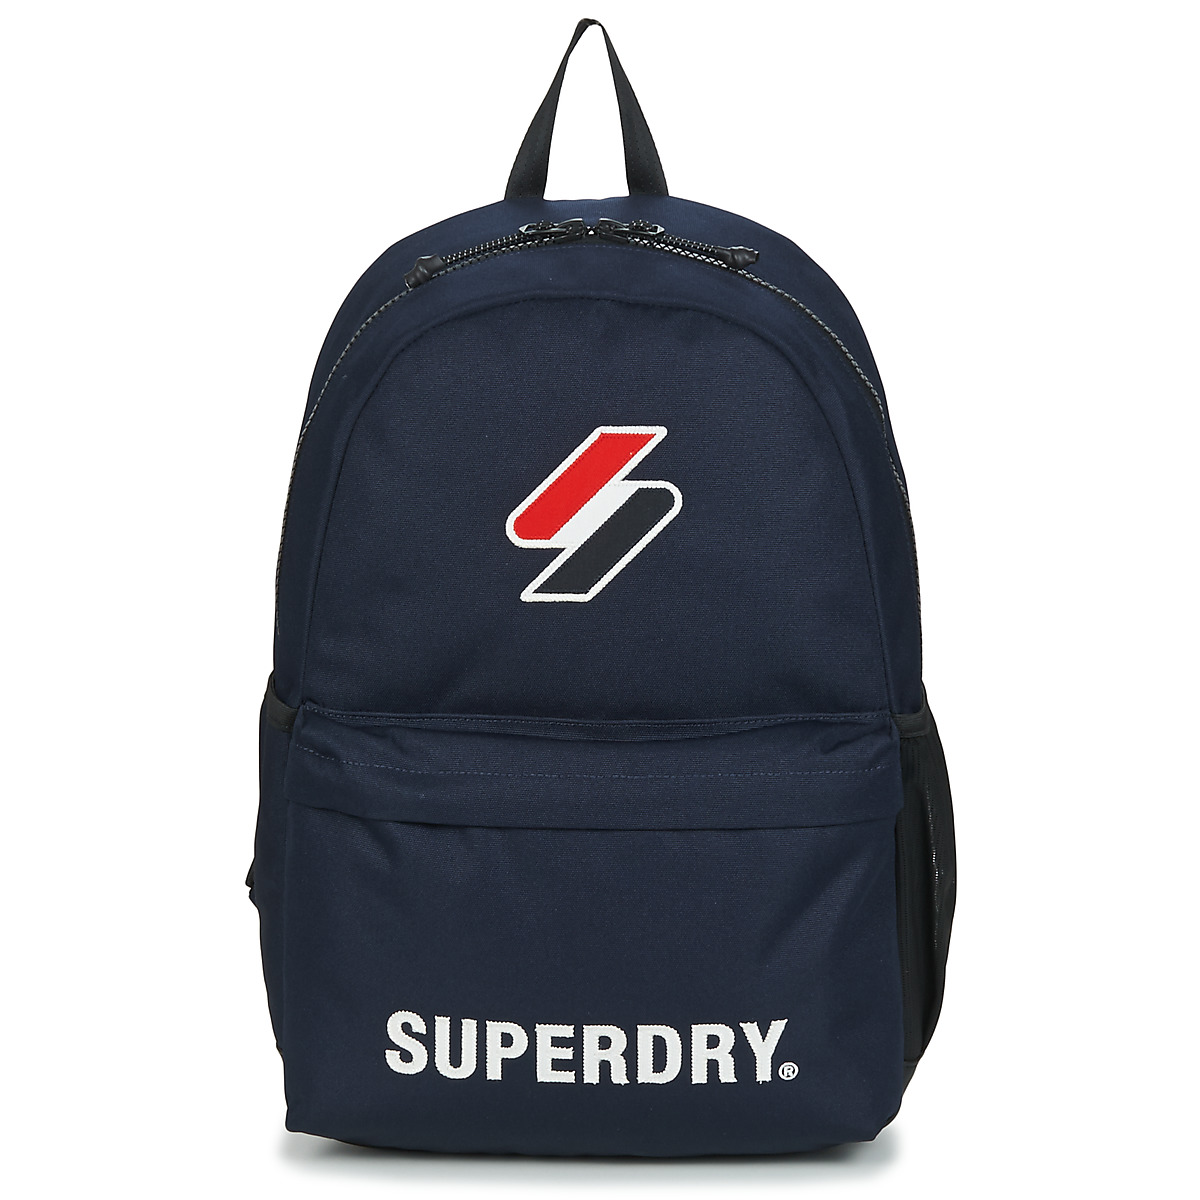 Superdry  SUPERDRY CODE MONTANA  women's Backpack in Blue. Sizes available:One size